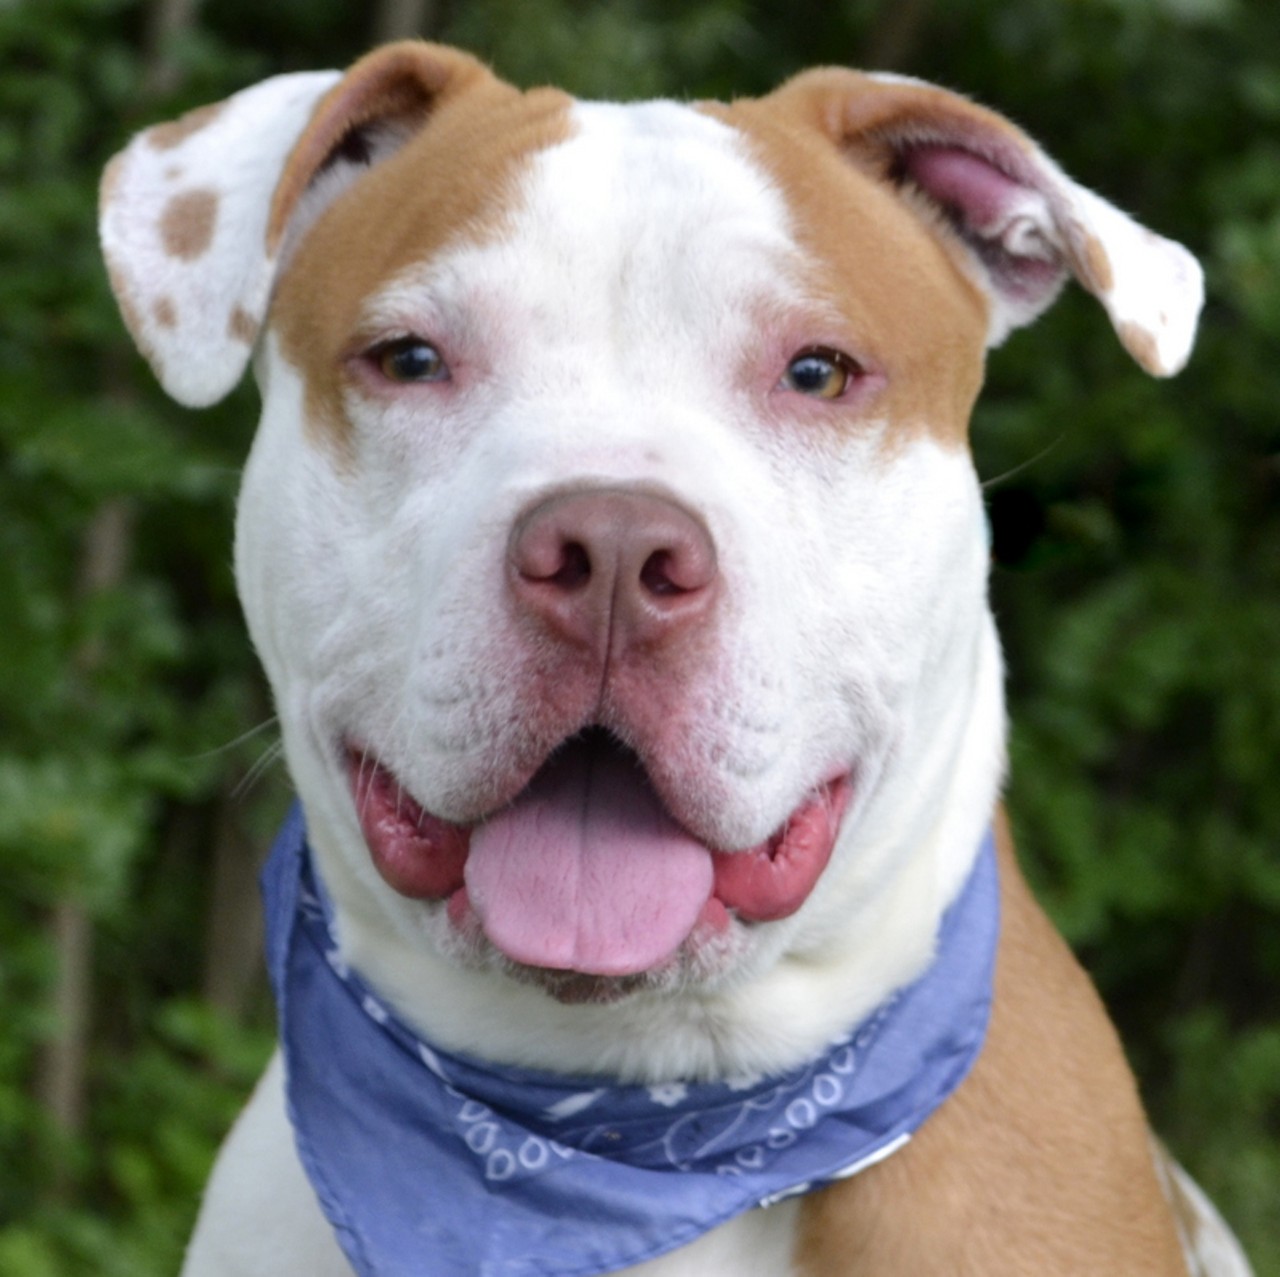 NAME: Jackson 
GENDER:  Male
BREED:  Pit Bull
AGE:  1 year, 7 months
WEIGHT:  53 pounds
SPECIAL CONSIDERATIONS:  None
REASON I CAME TO MHS:  Agency transfer
LOCATION:  Berman Center for Animal Care in Westland
ID NUMBER:  870831